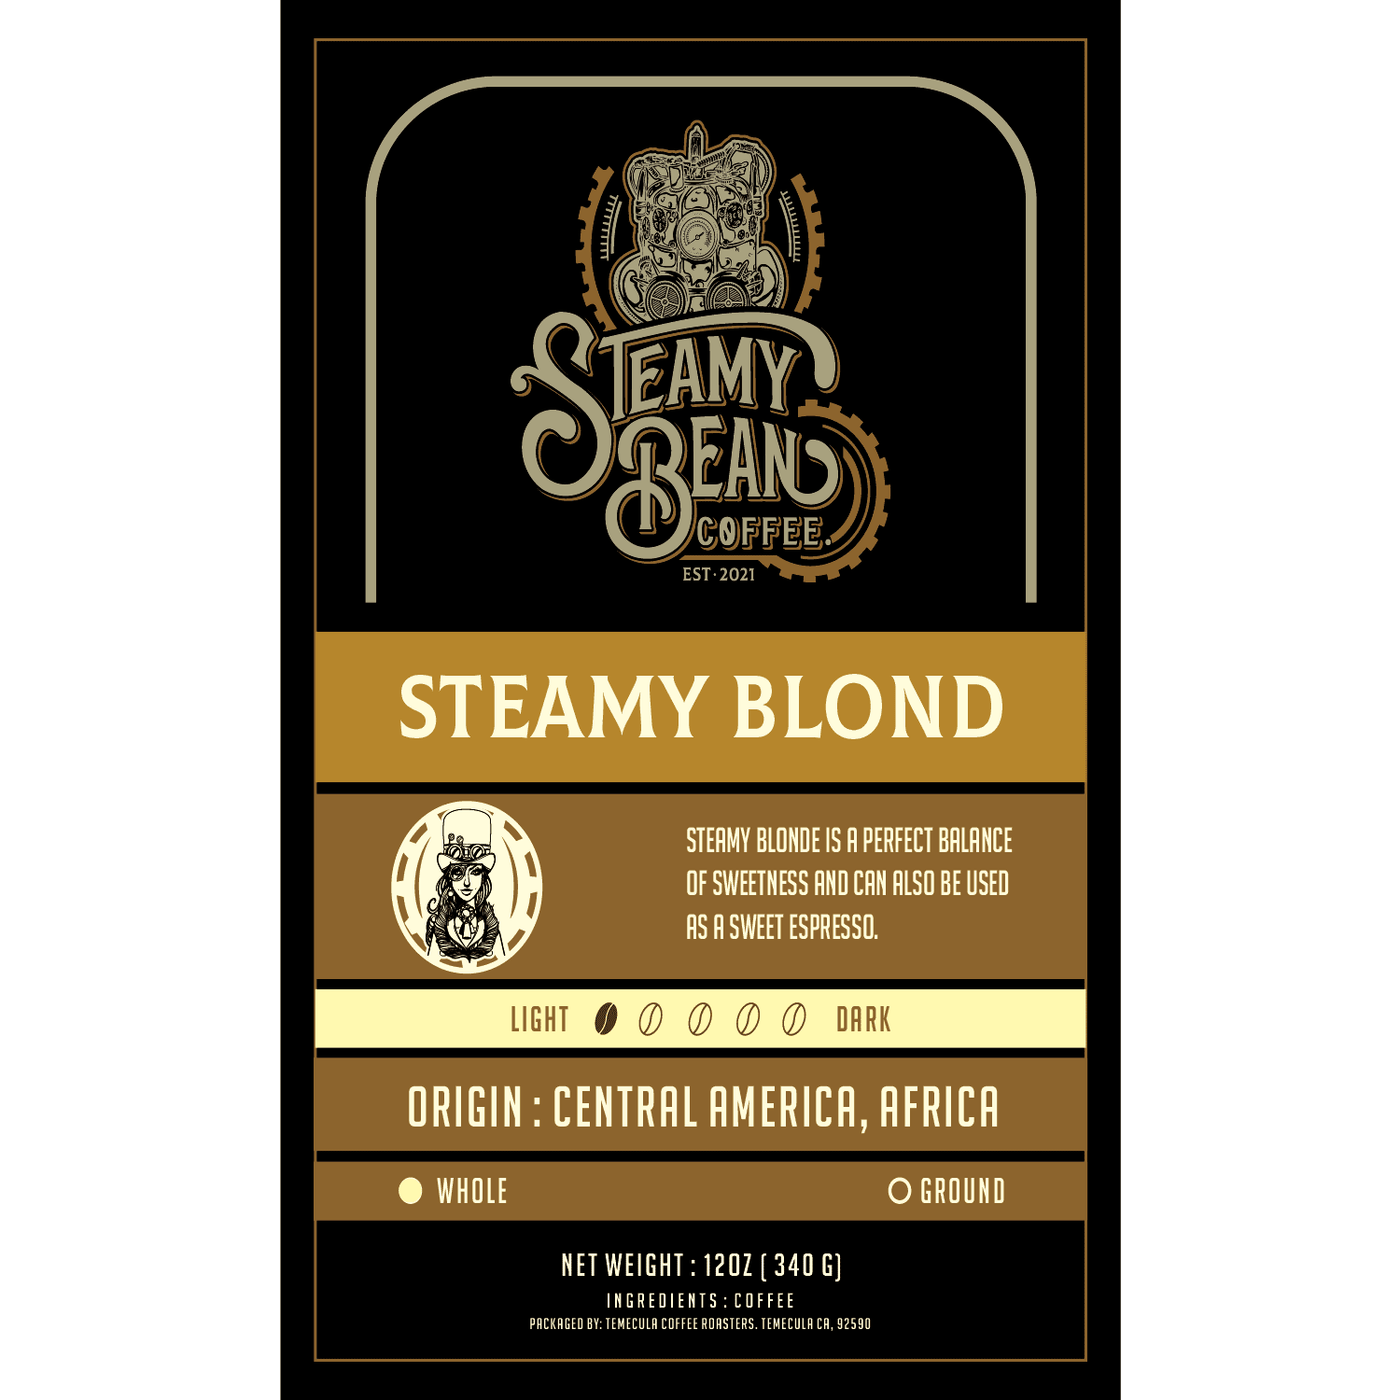 The label for steam blond roasted coffee beans that shows the roast, origins, and grind type